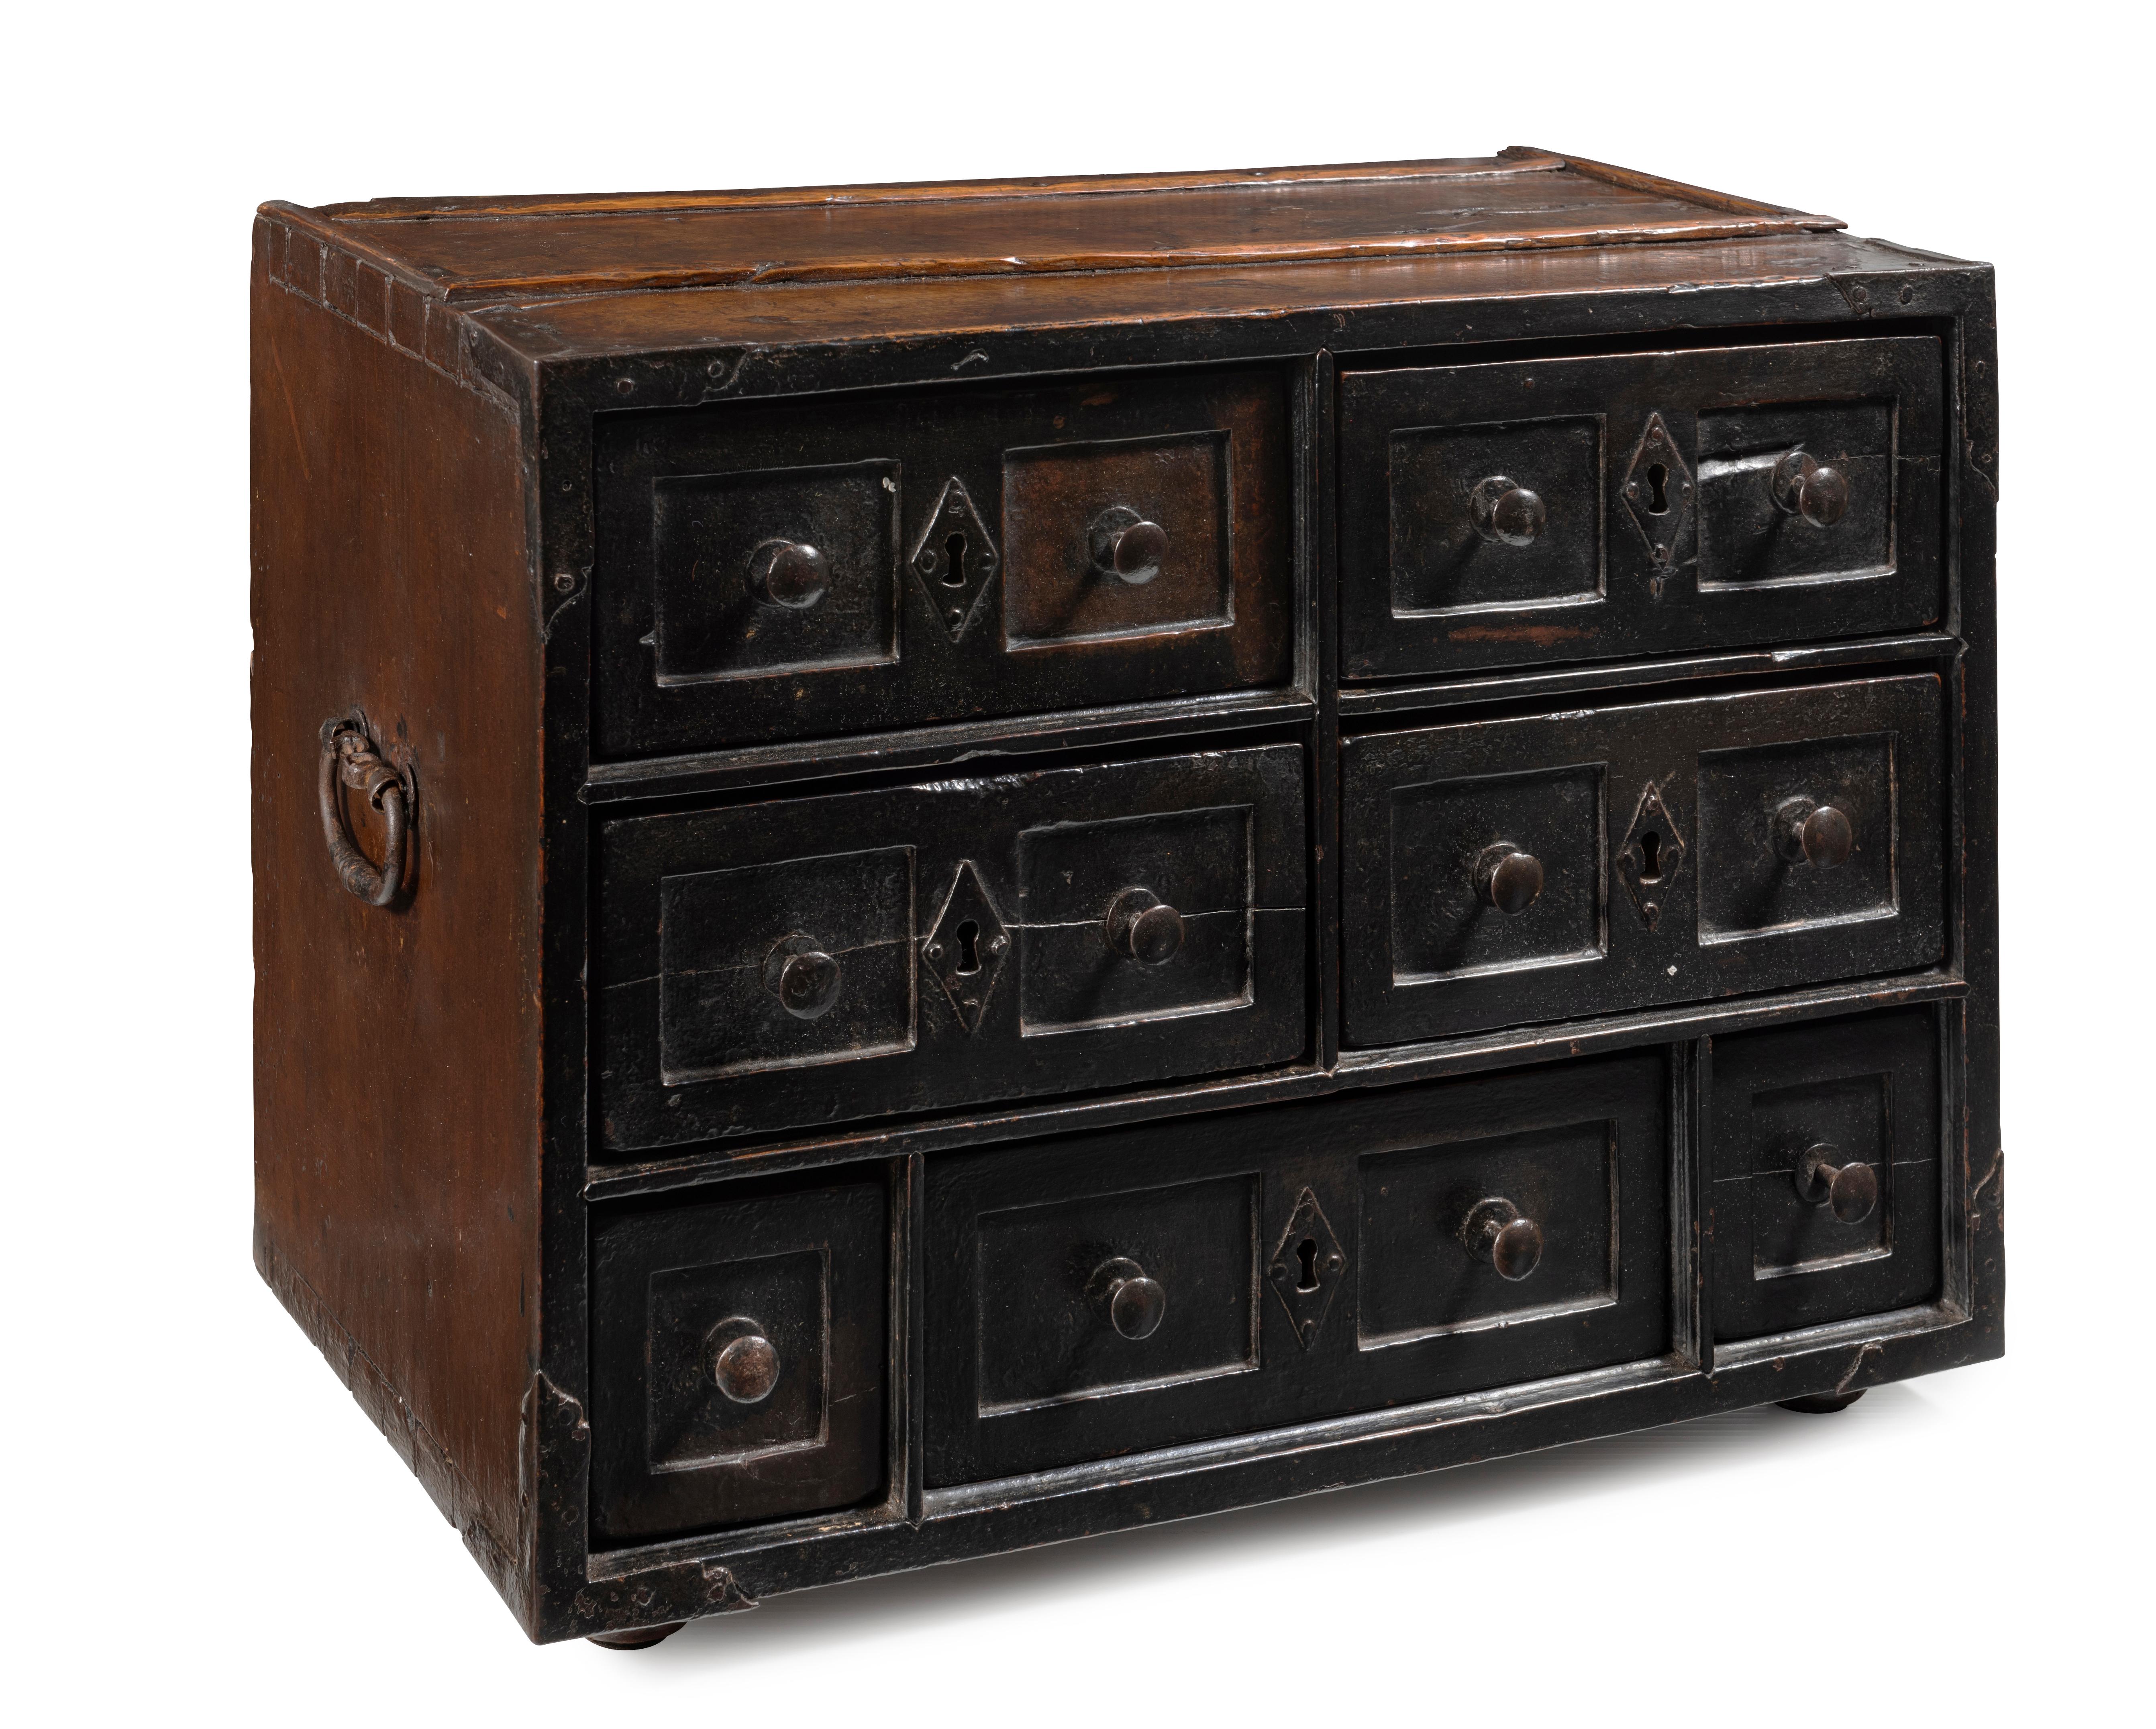 The plank top over three rows of seven drawers, the top and middle comprised of four conforming rectangular panels, each with central bronze diamond shaped escutcheon flanked by a pair of rounded brass handles in recess, the lower bank with